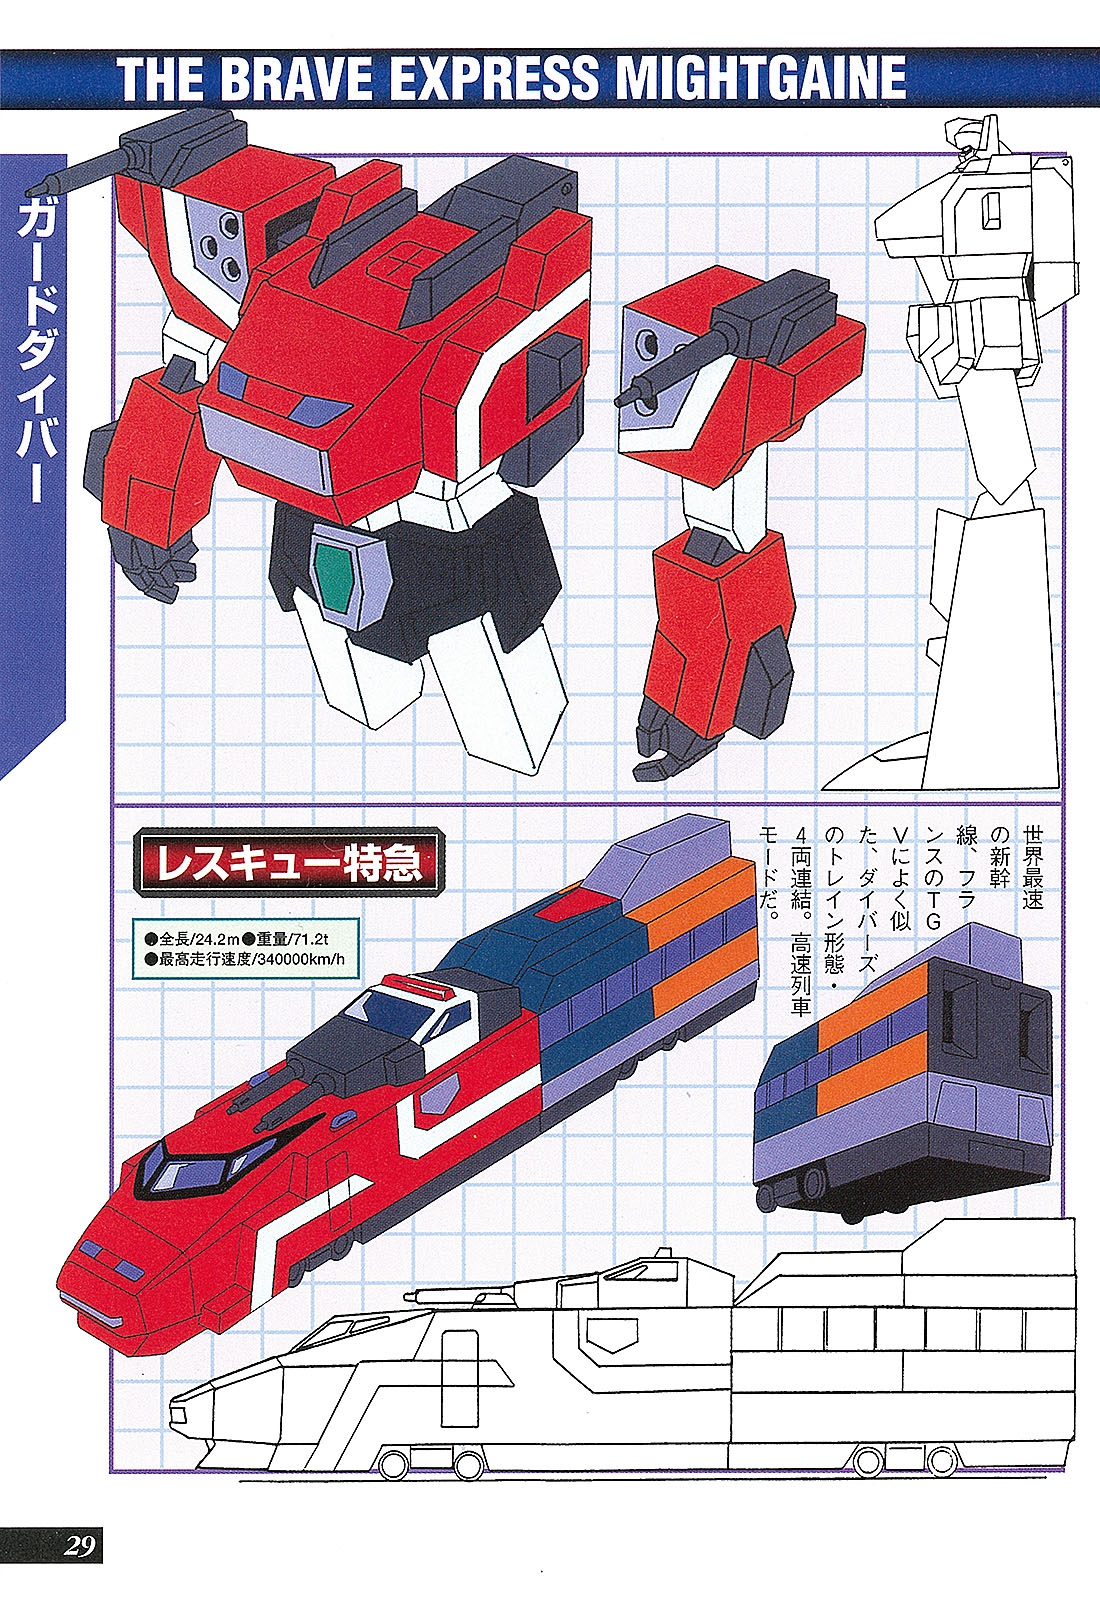 Dengeki Hobby Books - Data Collection No.11 - The Brave Express Might Gaine 30